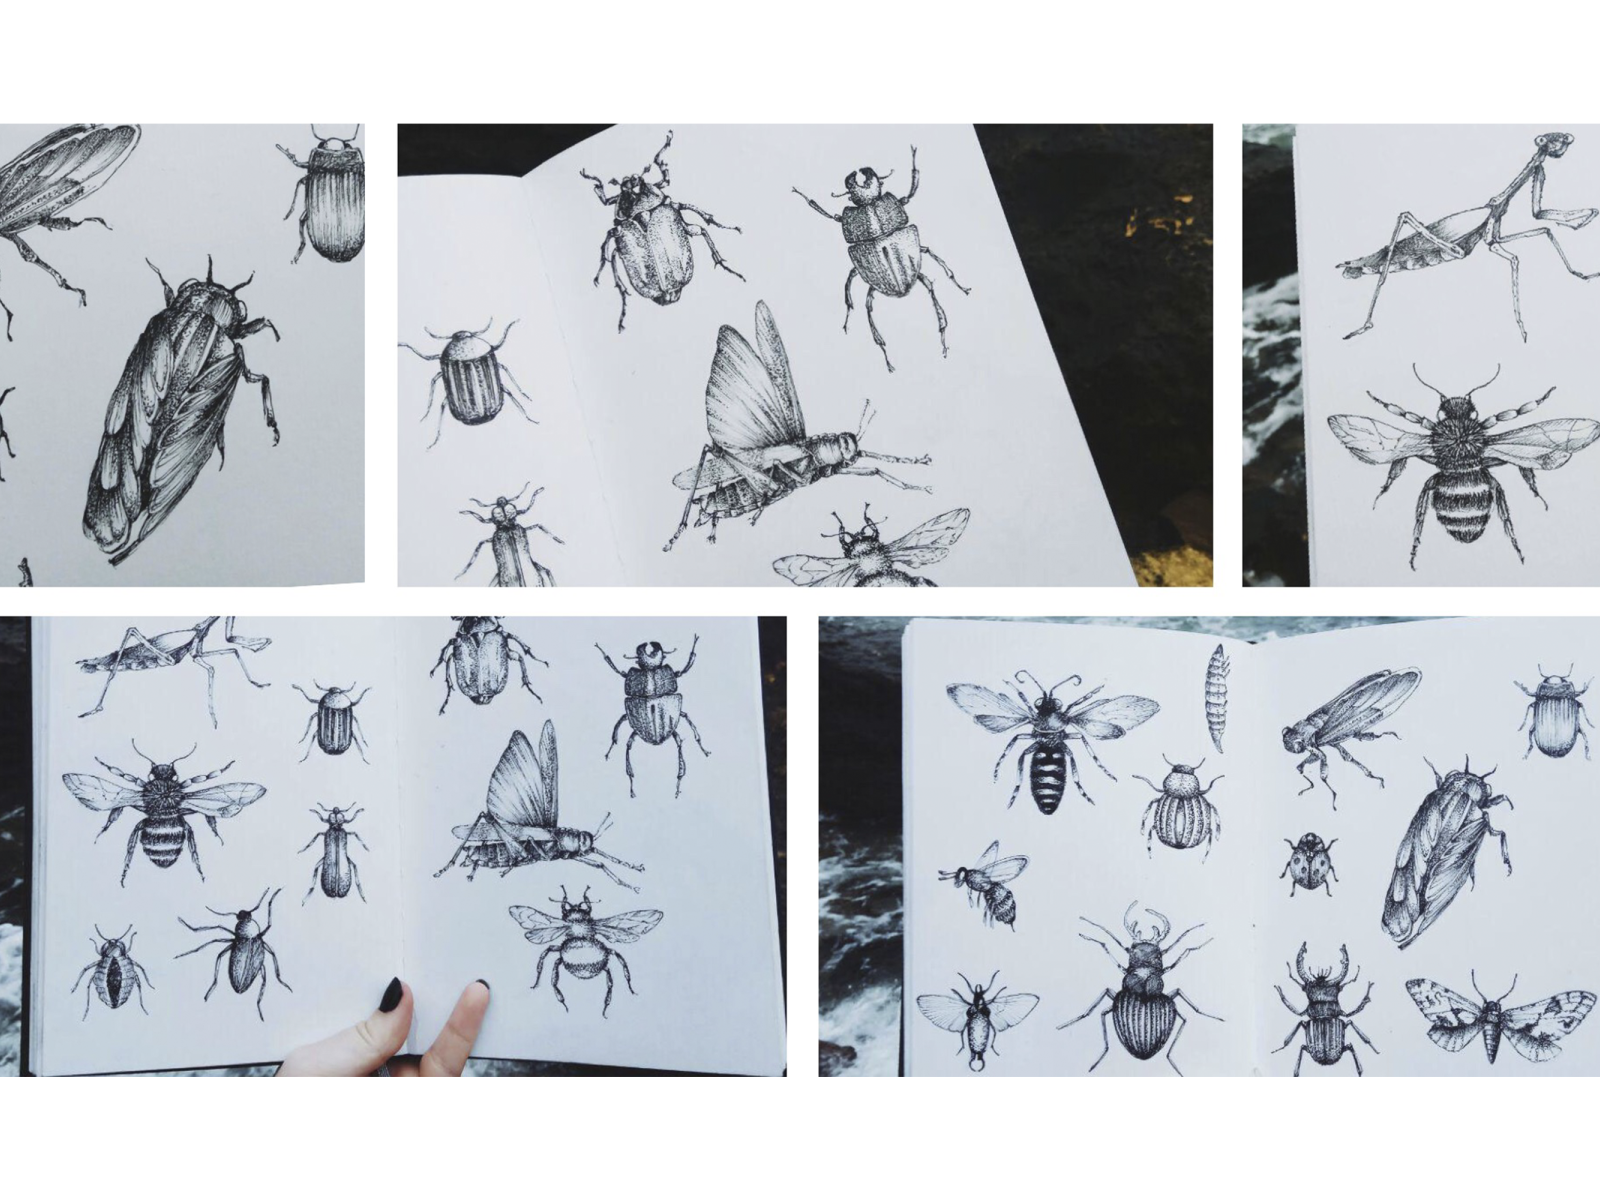 insects sketches atmosphere atmosphere illustration botanical illustration concept darkness design drawing illustration insects light magic sketchbook sketching